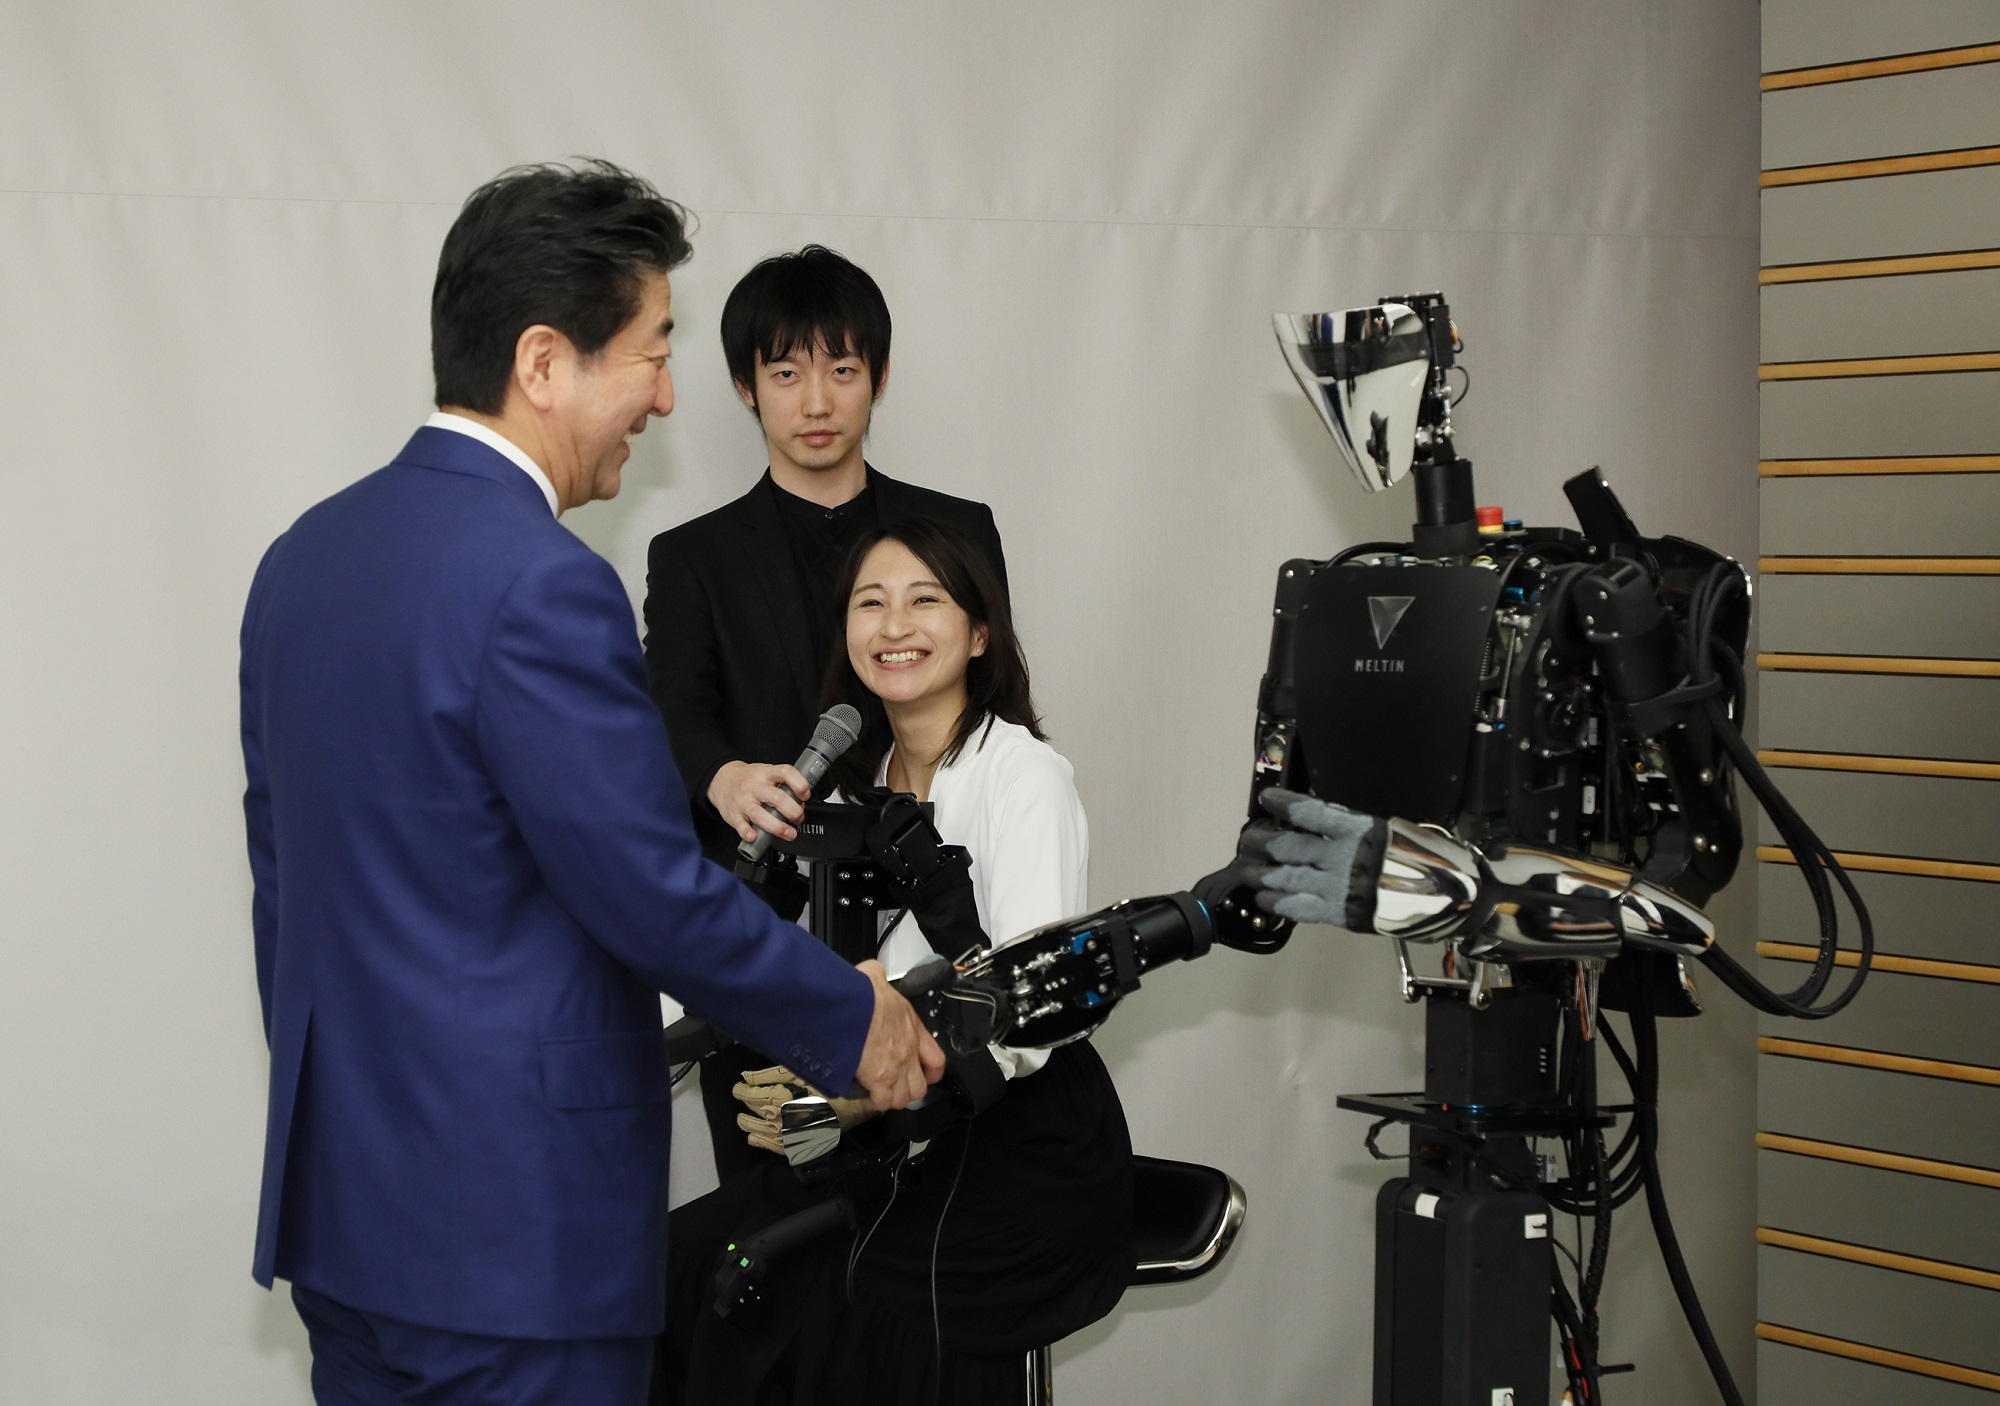 Photograph of the Prime Minister shaking hands with a robot